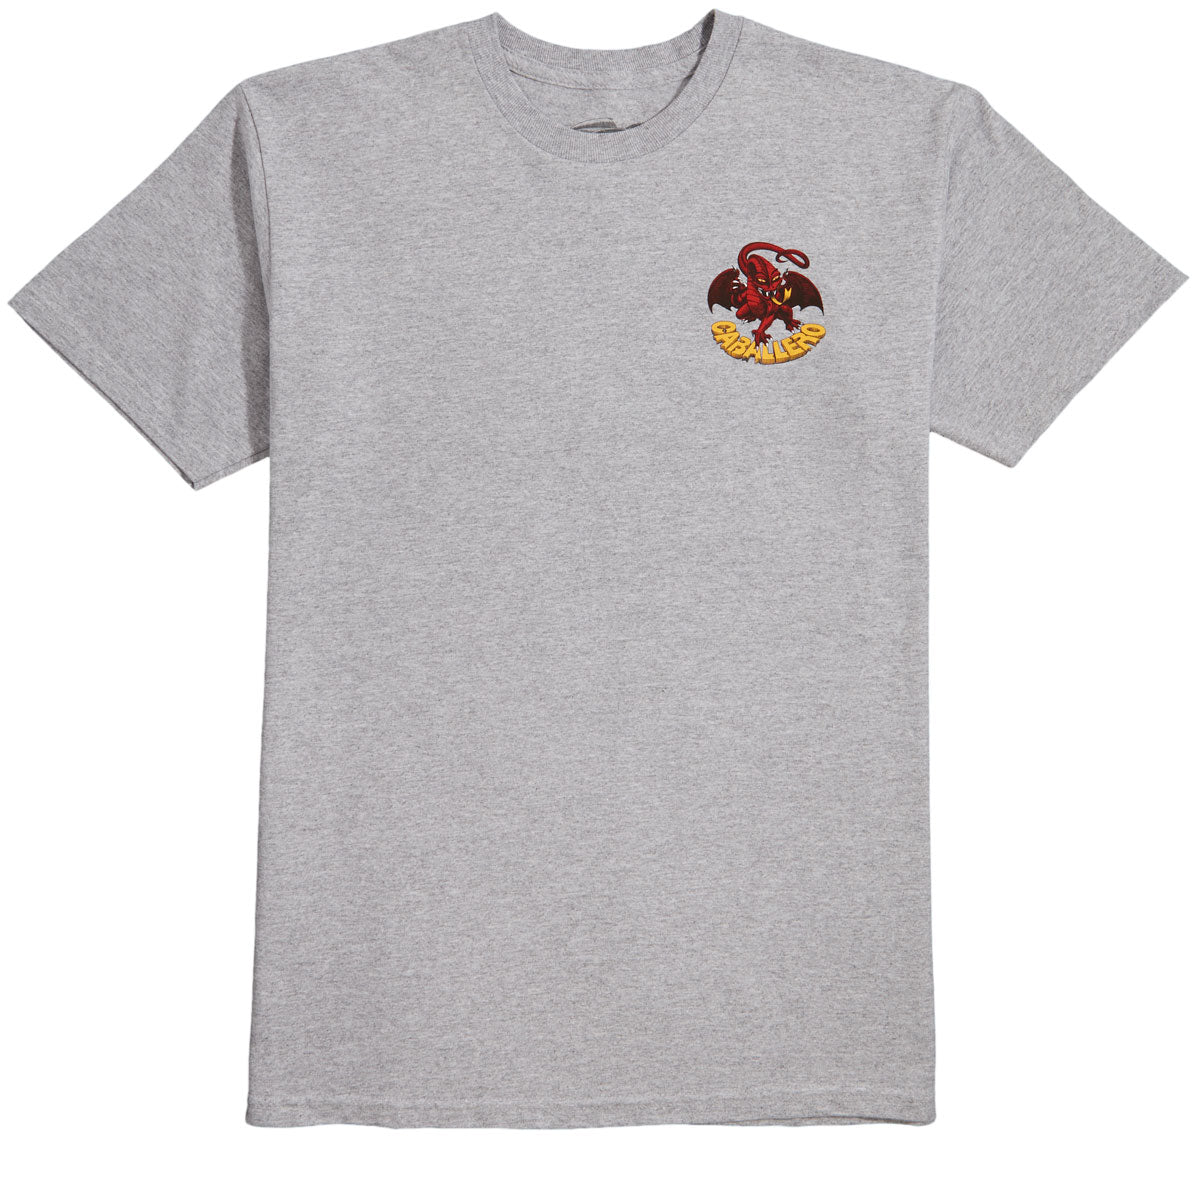 Powell-Peralta Cab Classic Dragon Ii T-Shirt - Athletic Heather image 2